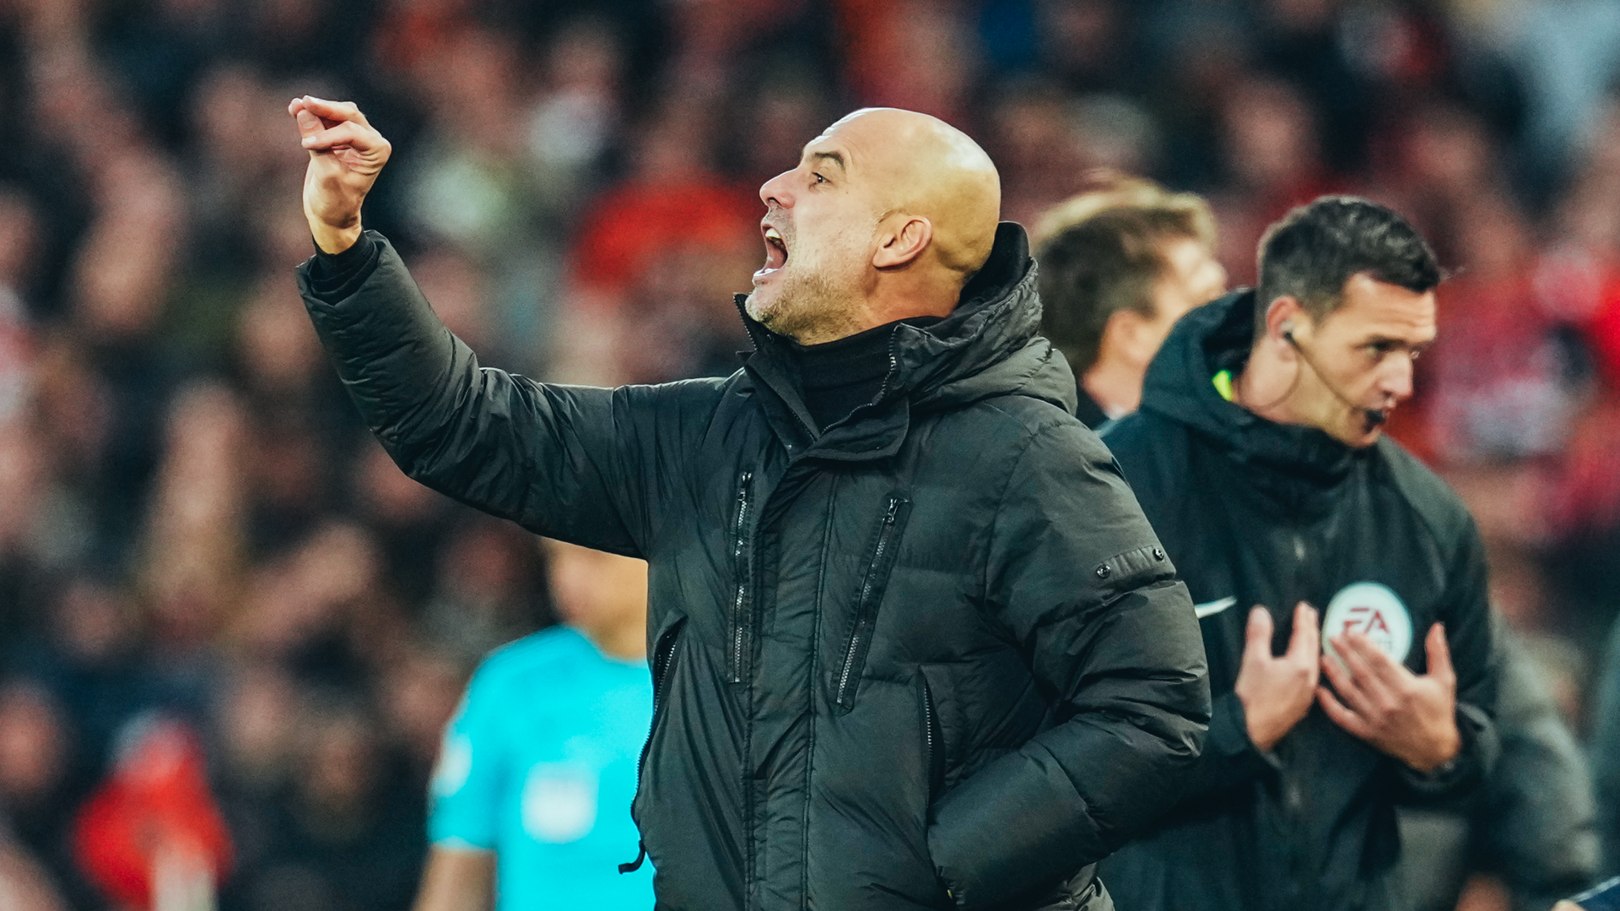 ‘We played with courage’ says Guardiola